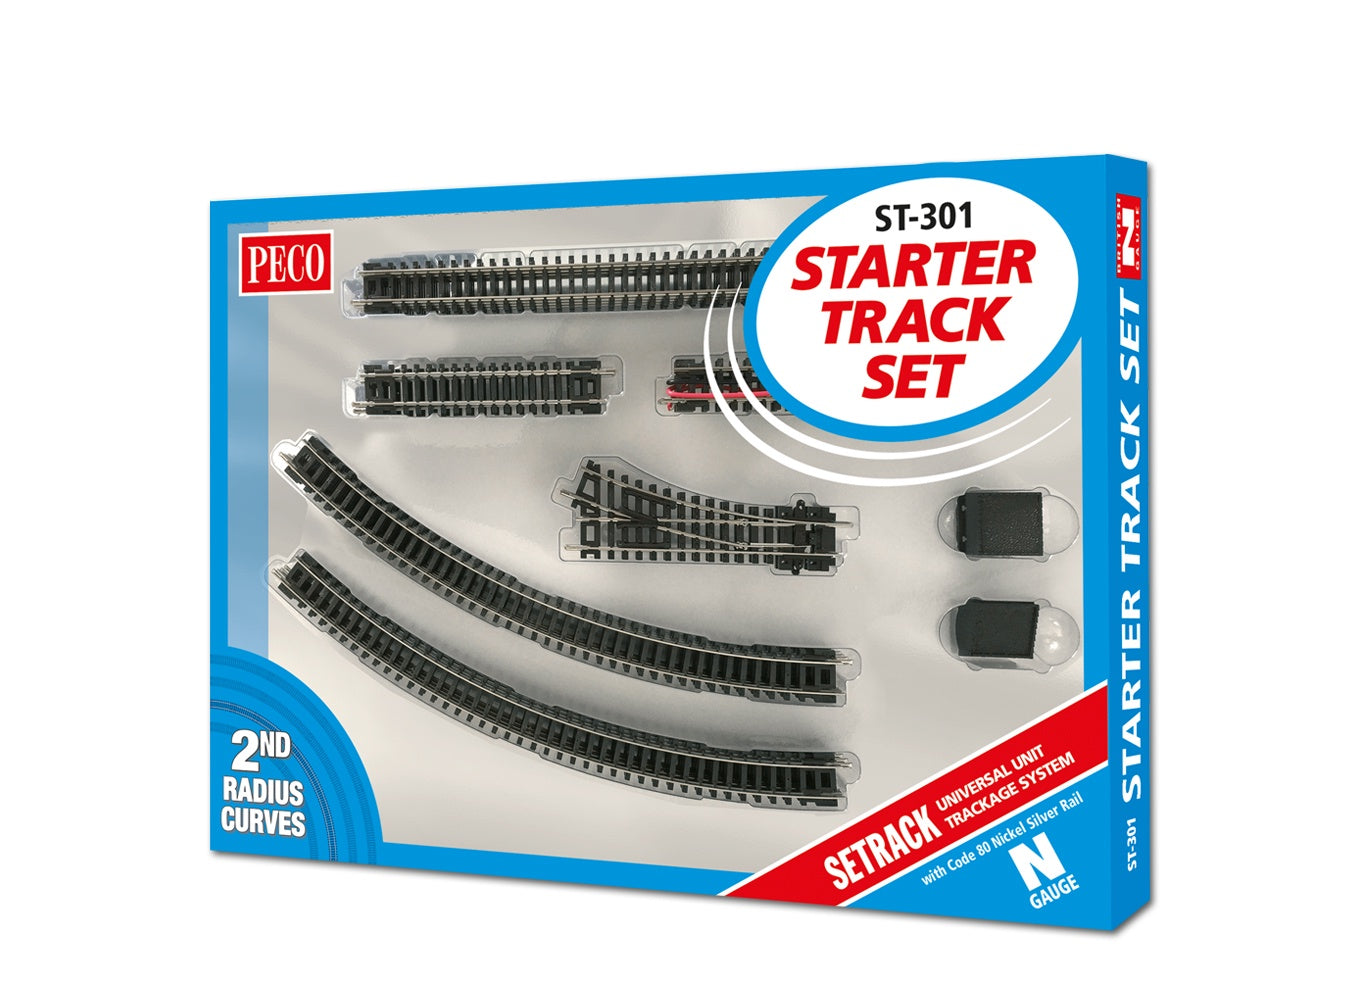 ST-301 Starter Track Set, 2nd Radius complete, boxed